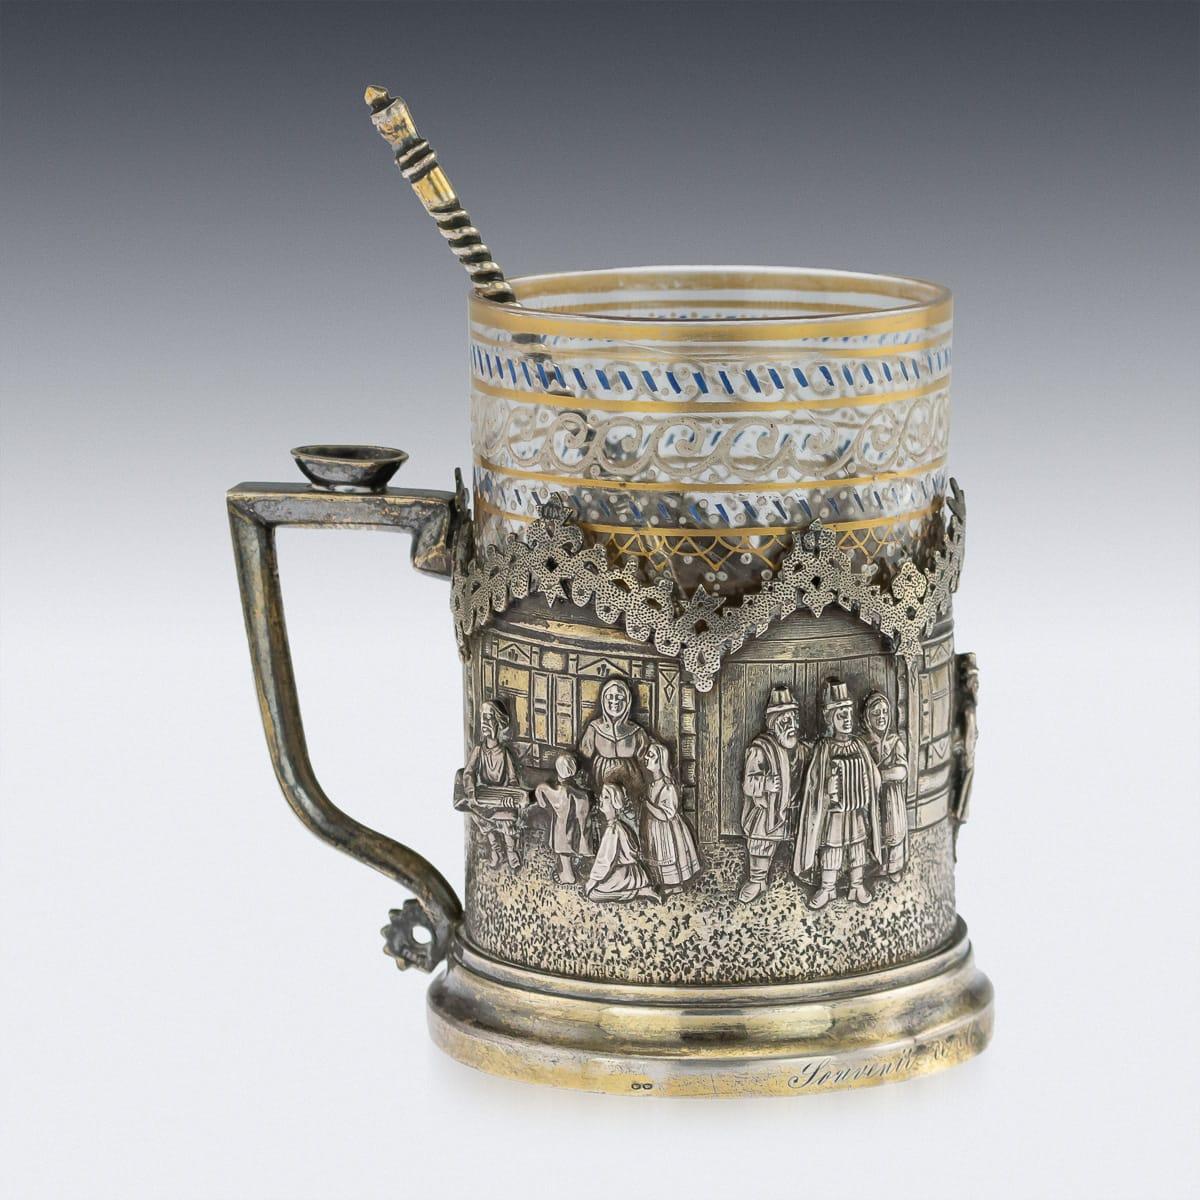 Antique 19th century Imperial Russian trompe l'oeil solid silver tea glass holder, realistically modelled in a shape of a house, on a stepped base, wood cladding walls and window made in a pan-Slavic style, depicting people outside, dancing,